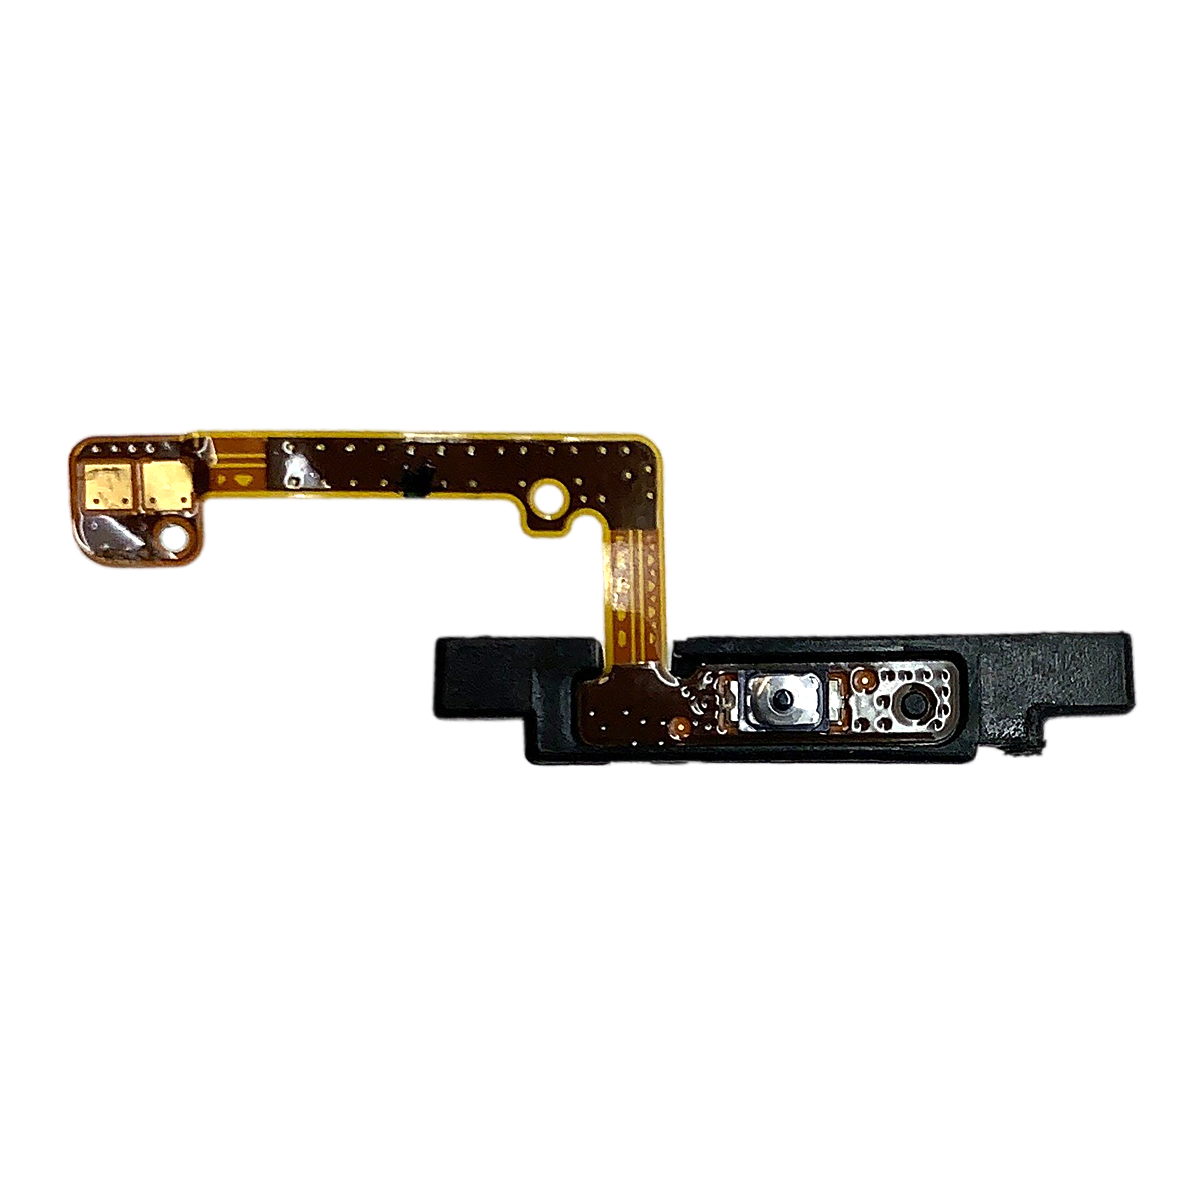 LG G8X ThinQ Power Button with Flex Cable Replacement